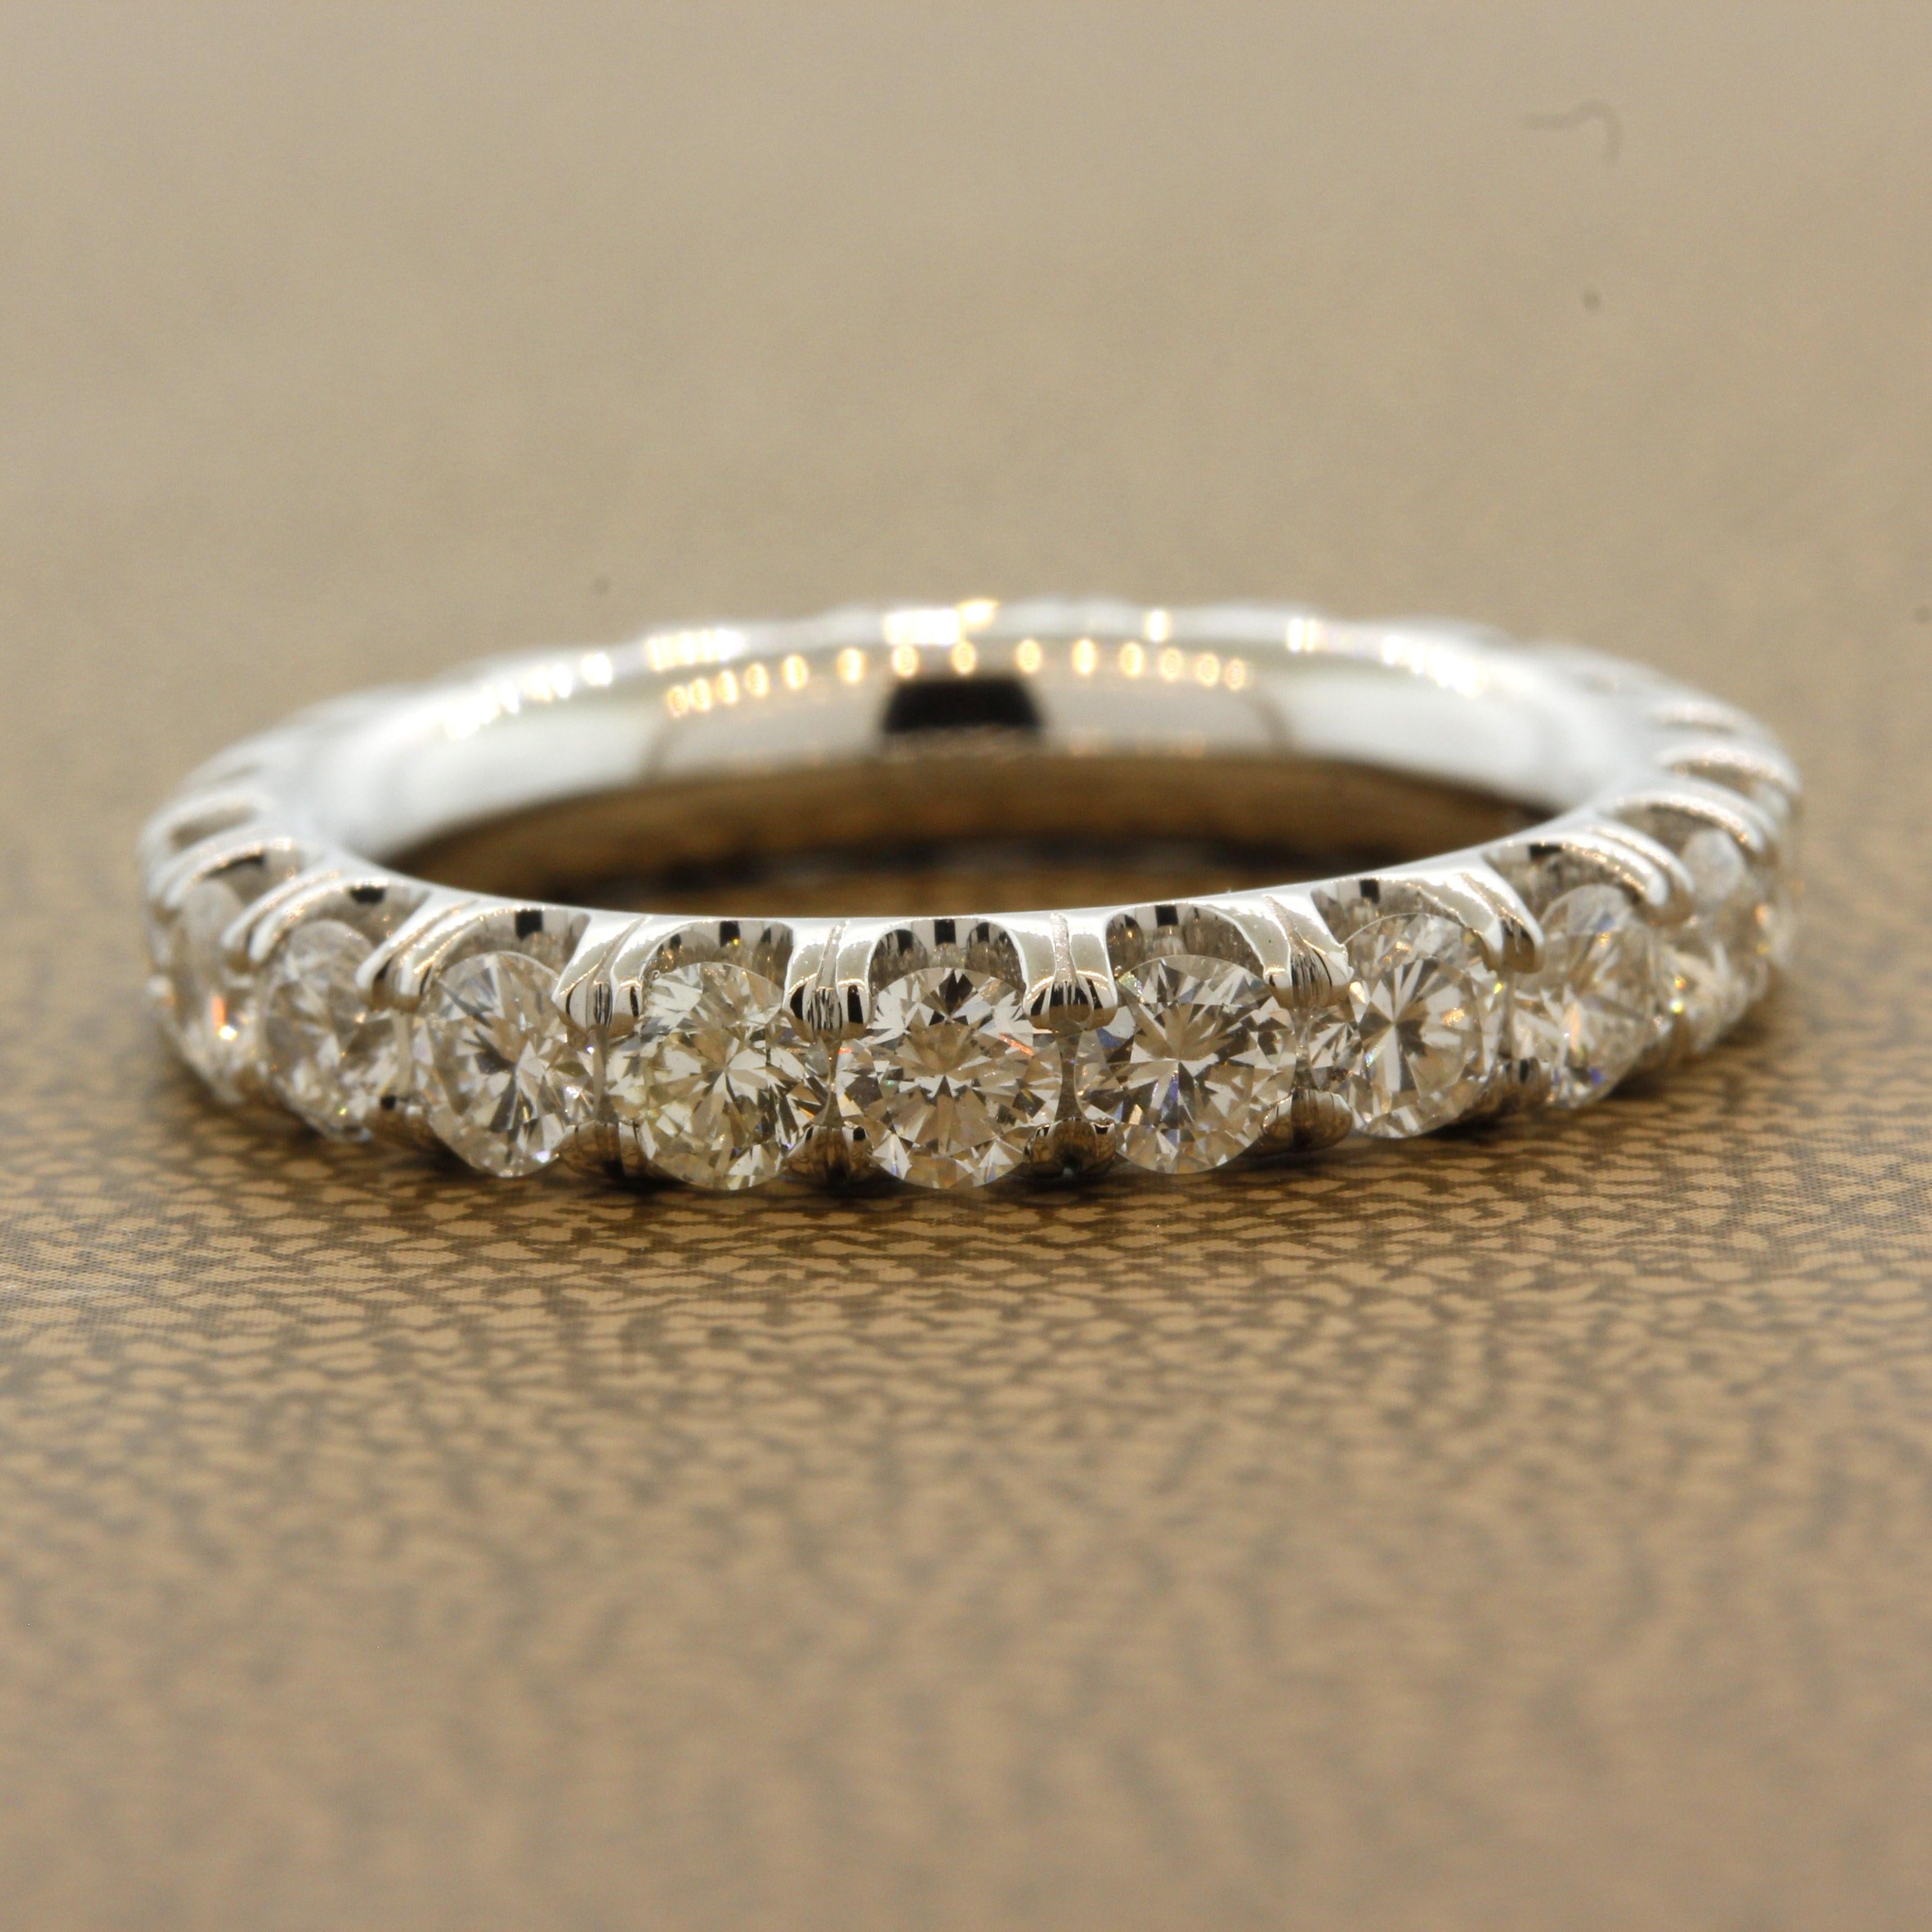 A classic diamond eternity ring featuring 2.35 carats of round brilliant-cut diamonds. They are perfectly matching in size and color making it an impressive array of diamonds. Made in 14k white gold and ready to be worn.

Ring Size 7.75

Weight: 5.3